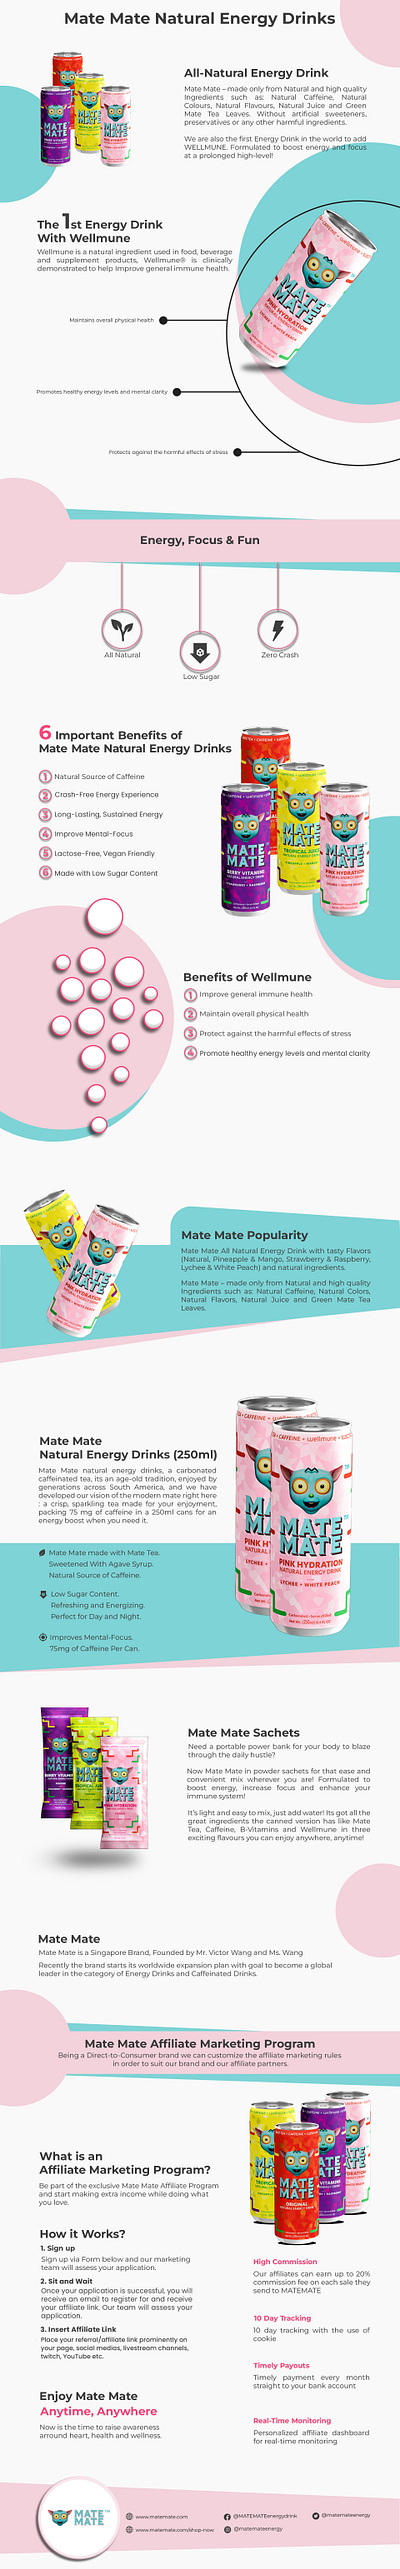 Energy drink infographic cold drink cold drink infographic cold drinks cold drinks infographics design energy drink energy drink infographics energy drinks graphic art graphic design graphics infographic infographics mate mate energy drink photoshop photoshop art photoshop graphics